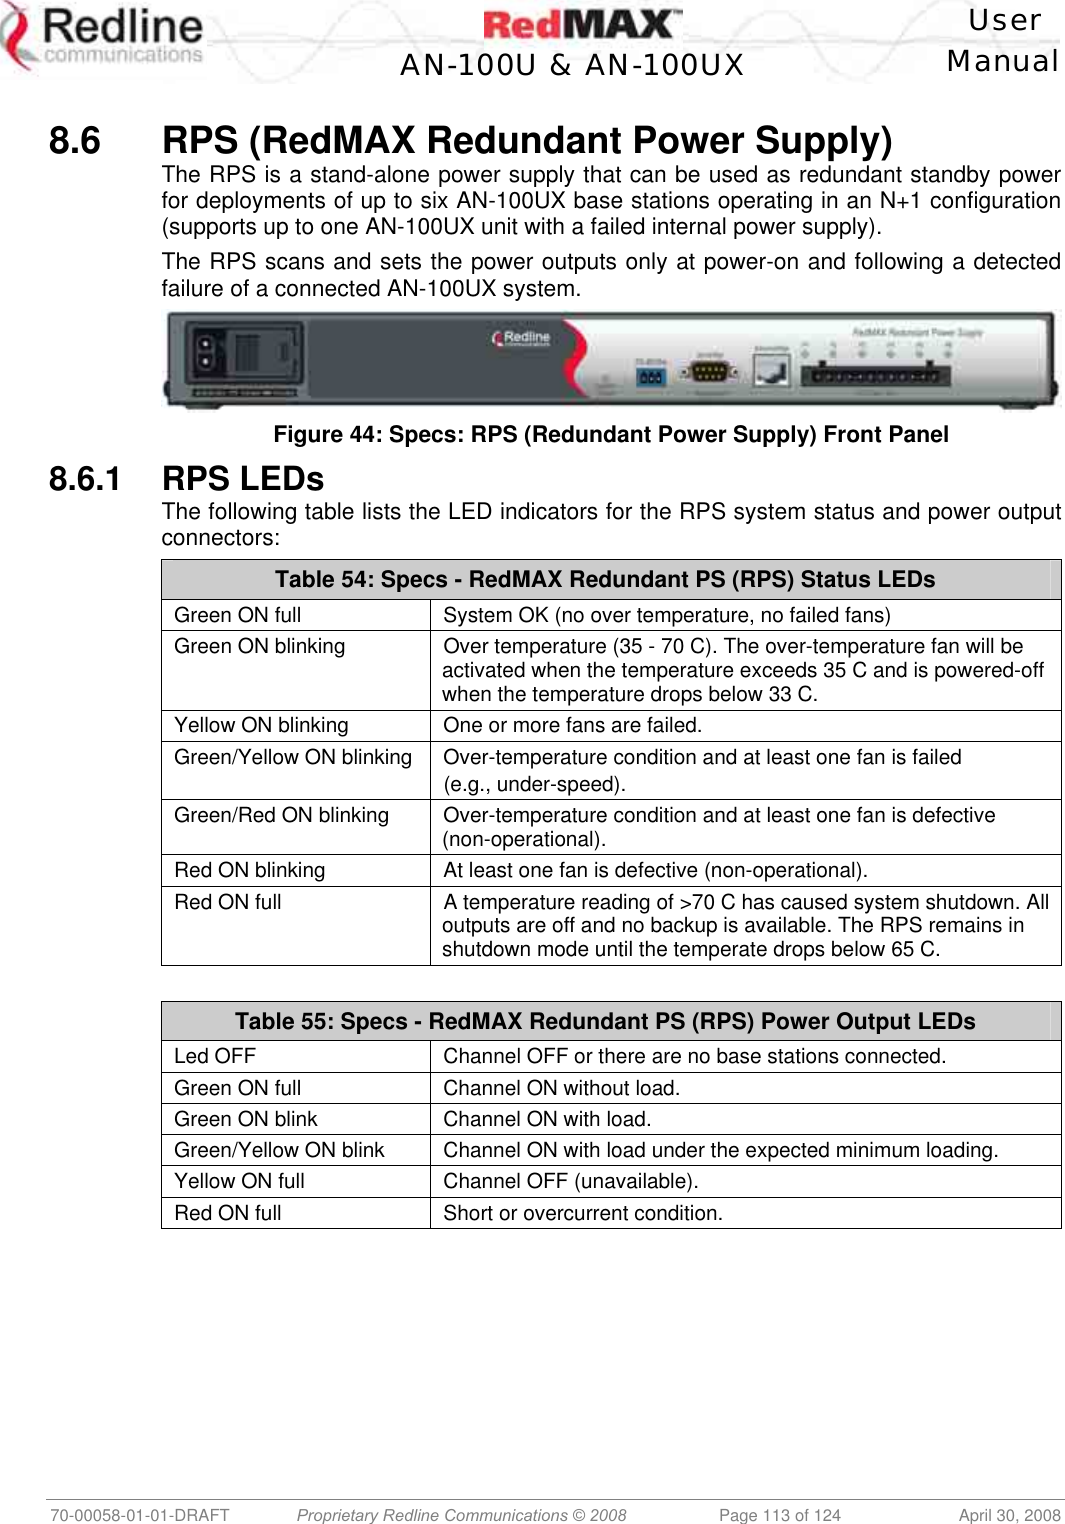    User  AN-100U &amp; AN-100UX Manual   70-00058-01-01-DRAFT  Proprietary Redline Communications © 2008   Page 113 of 124  April 30, 2008  8.6  RPS (RedMAX Redundant Power Supply) The RPS is a stand-alone power supply that can be used as redundant standby power for deployments of up to six AN-100UX base stations operating in an N+1 configuration (supports up to one AN-100UX unit with a failed internal power supply). The RPS scans and sets the power outputs only at power-on and following a detected failure of a connected AN-100UX system.  Figure 44: Specs: RPS (Redundant Power Supply) Front Panel 8.6.1 RPS LEDs The following table lists the LED indicators for the RPS system status and power output connectors: Table 54: Specs - RedMAX Redundant PS (RPS) Status LEDs Green ON full  System OK (no over temperature, no failed fans) Green ON blinking  Over temperature (35 - 70 C). The over-temperature fan will be activated when the temperature exceeds 35 C and is powered-off when the temperature drops below 33 C.  Yellow ON blinking  One or more fans are failed. Green/Yellow ON blinking  Over-temperature condition and at least one fan is failed (e.g., under-speed). Green/Red ON blinking  Over-temperature condition and at least one fan is defective (non-operational). Red ON blinking  At least one fan is defective (non-operational). Red ON full  A temperature reading of &gt;70 C has caused system shutdown. All outputs are off and no backup is available. The RPS remains in shutdown mode until the temperate drops below 65 C.   Table 55: Specs - RedMAX Redundant PS (RPS) Power Output LEDs Led OFF  Channel OFF or there are no base stations connected. Green ON full  Channel ON without load. Green ON blink  Channel ON with load. Green/Yellow ON blink  Channel ON with load under the expected minimum loading. Yellow ON full  Channel OFF (unavailable). Red ON full  Short or overcurrent condition.  